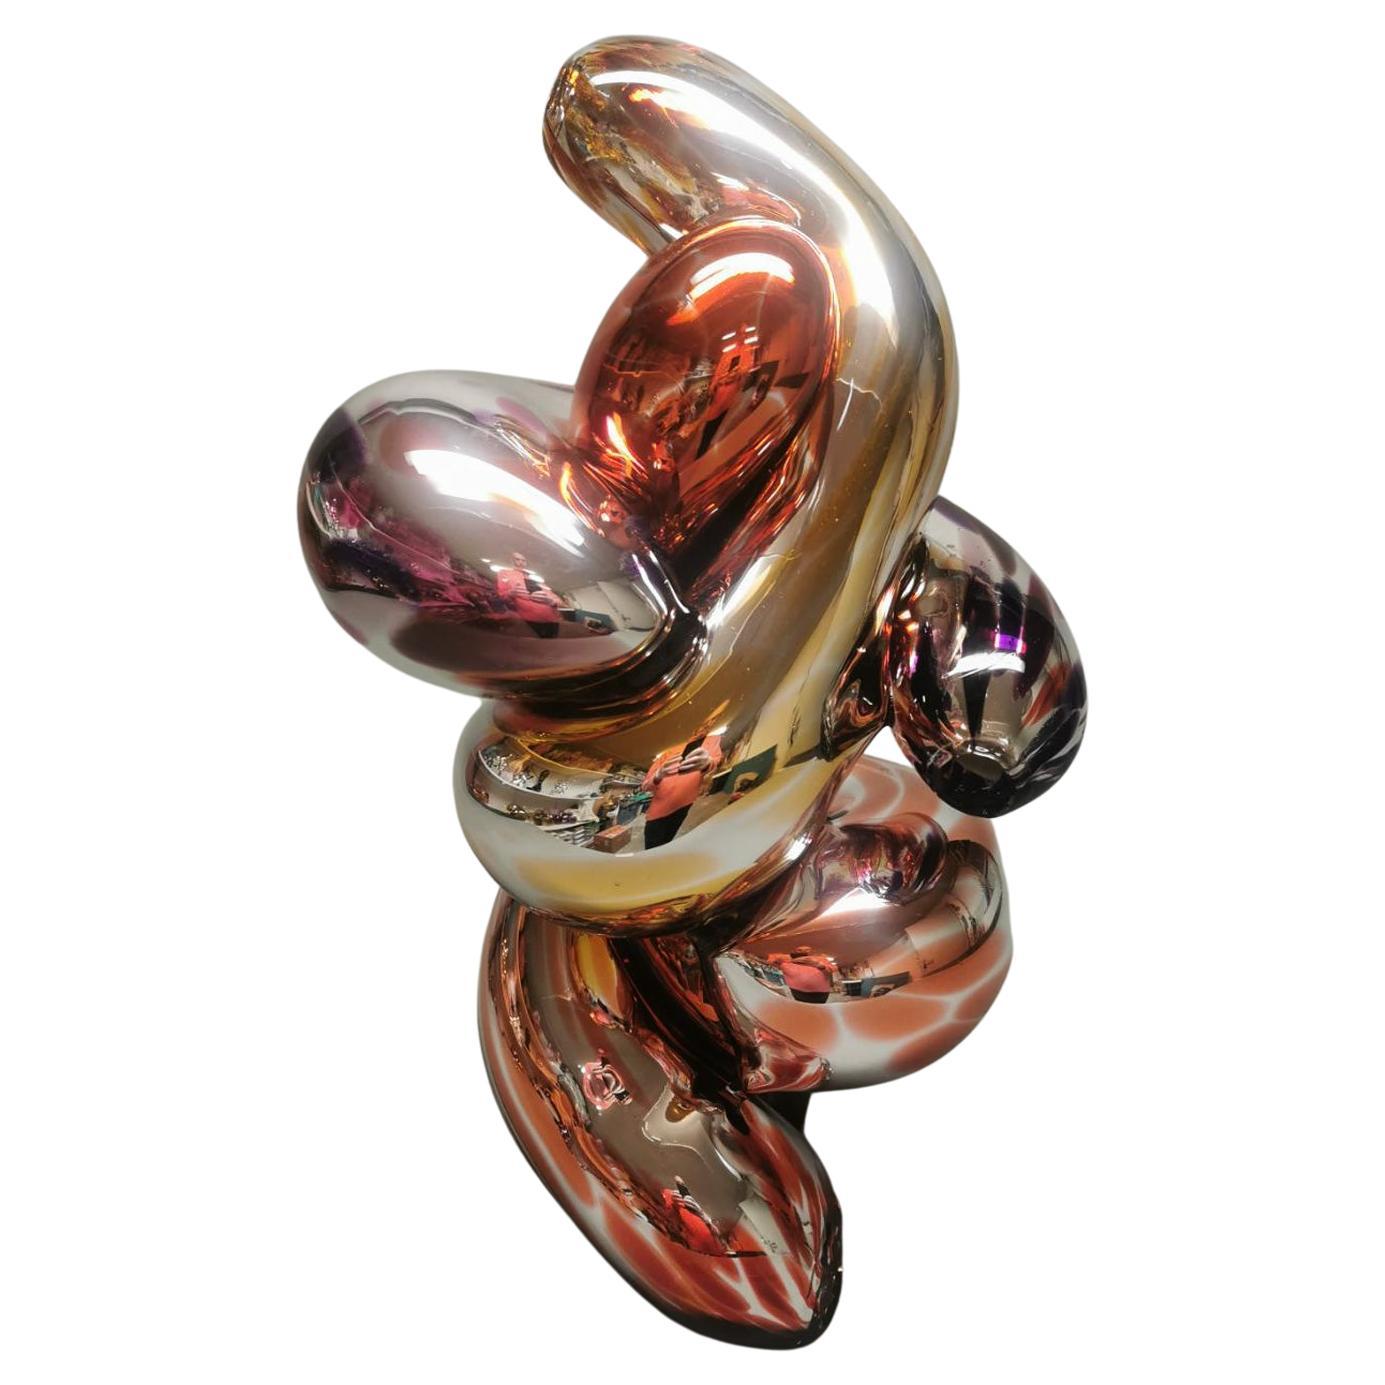 Abstract, Mirrored Glass Sculpture by Markus Emilsson, In Stock For Sale